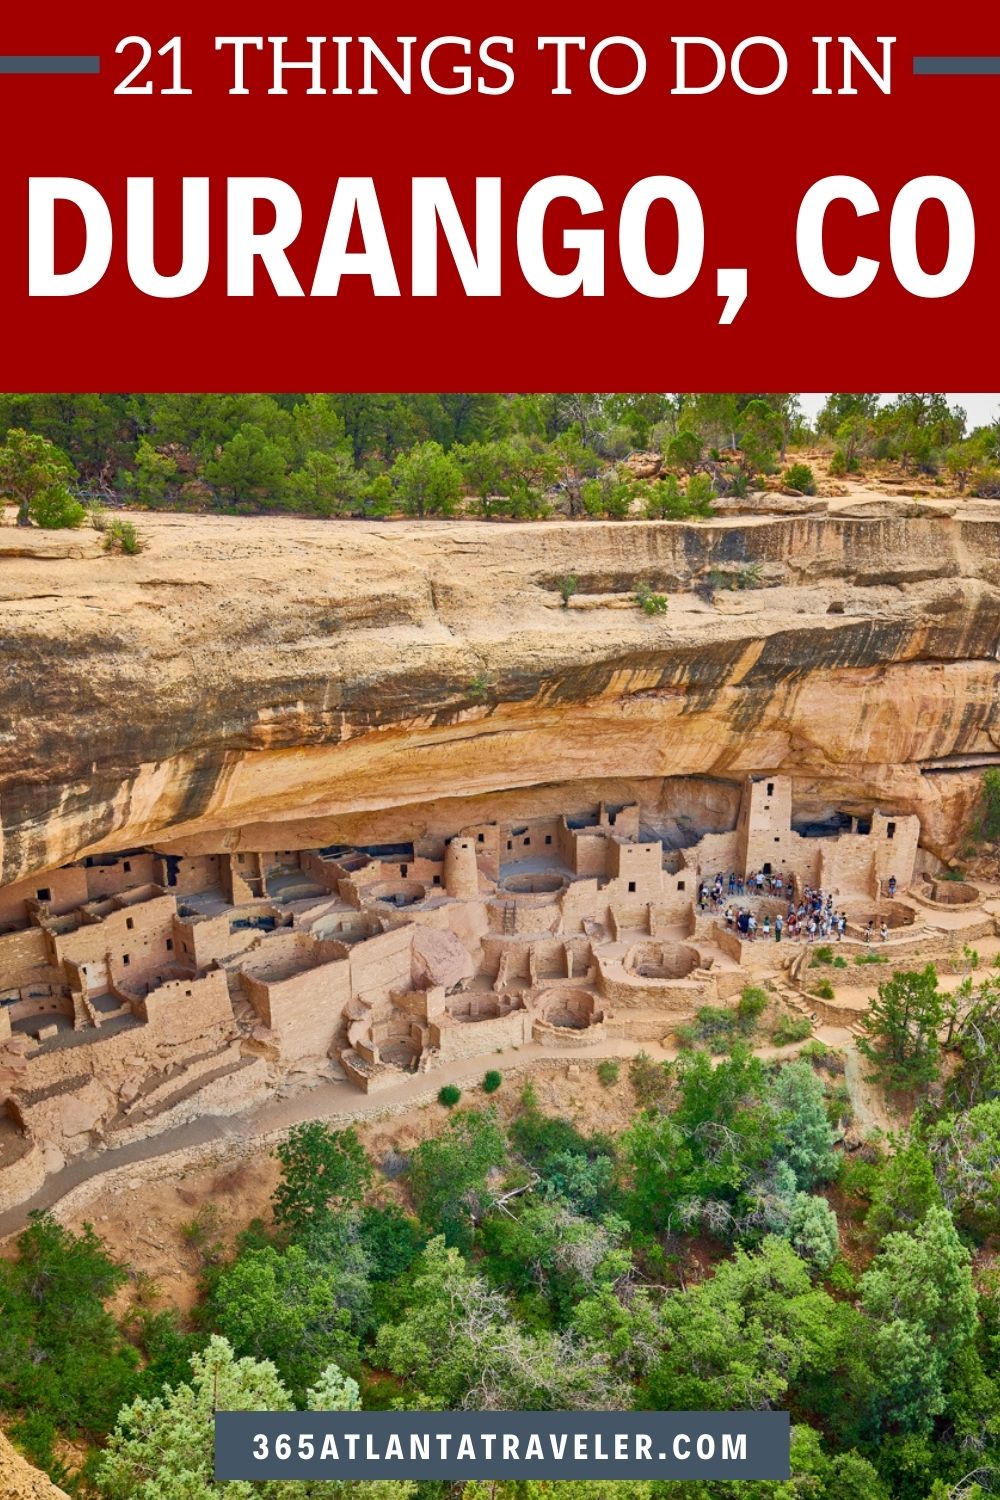 Romantic things to do in durango co